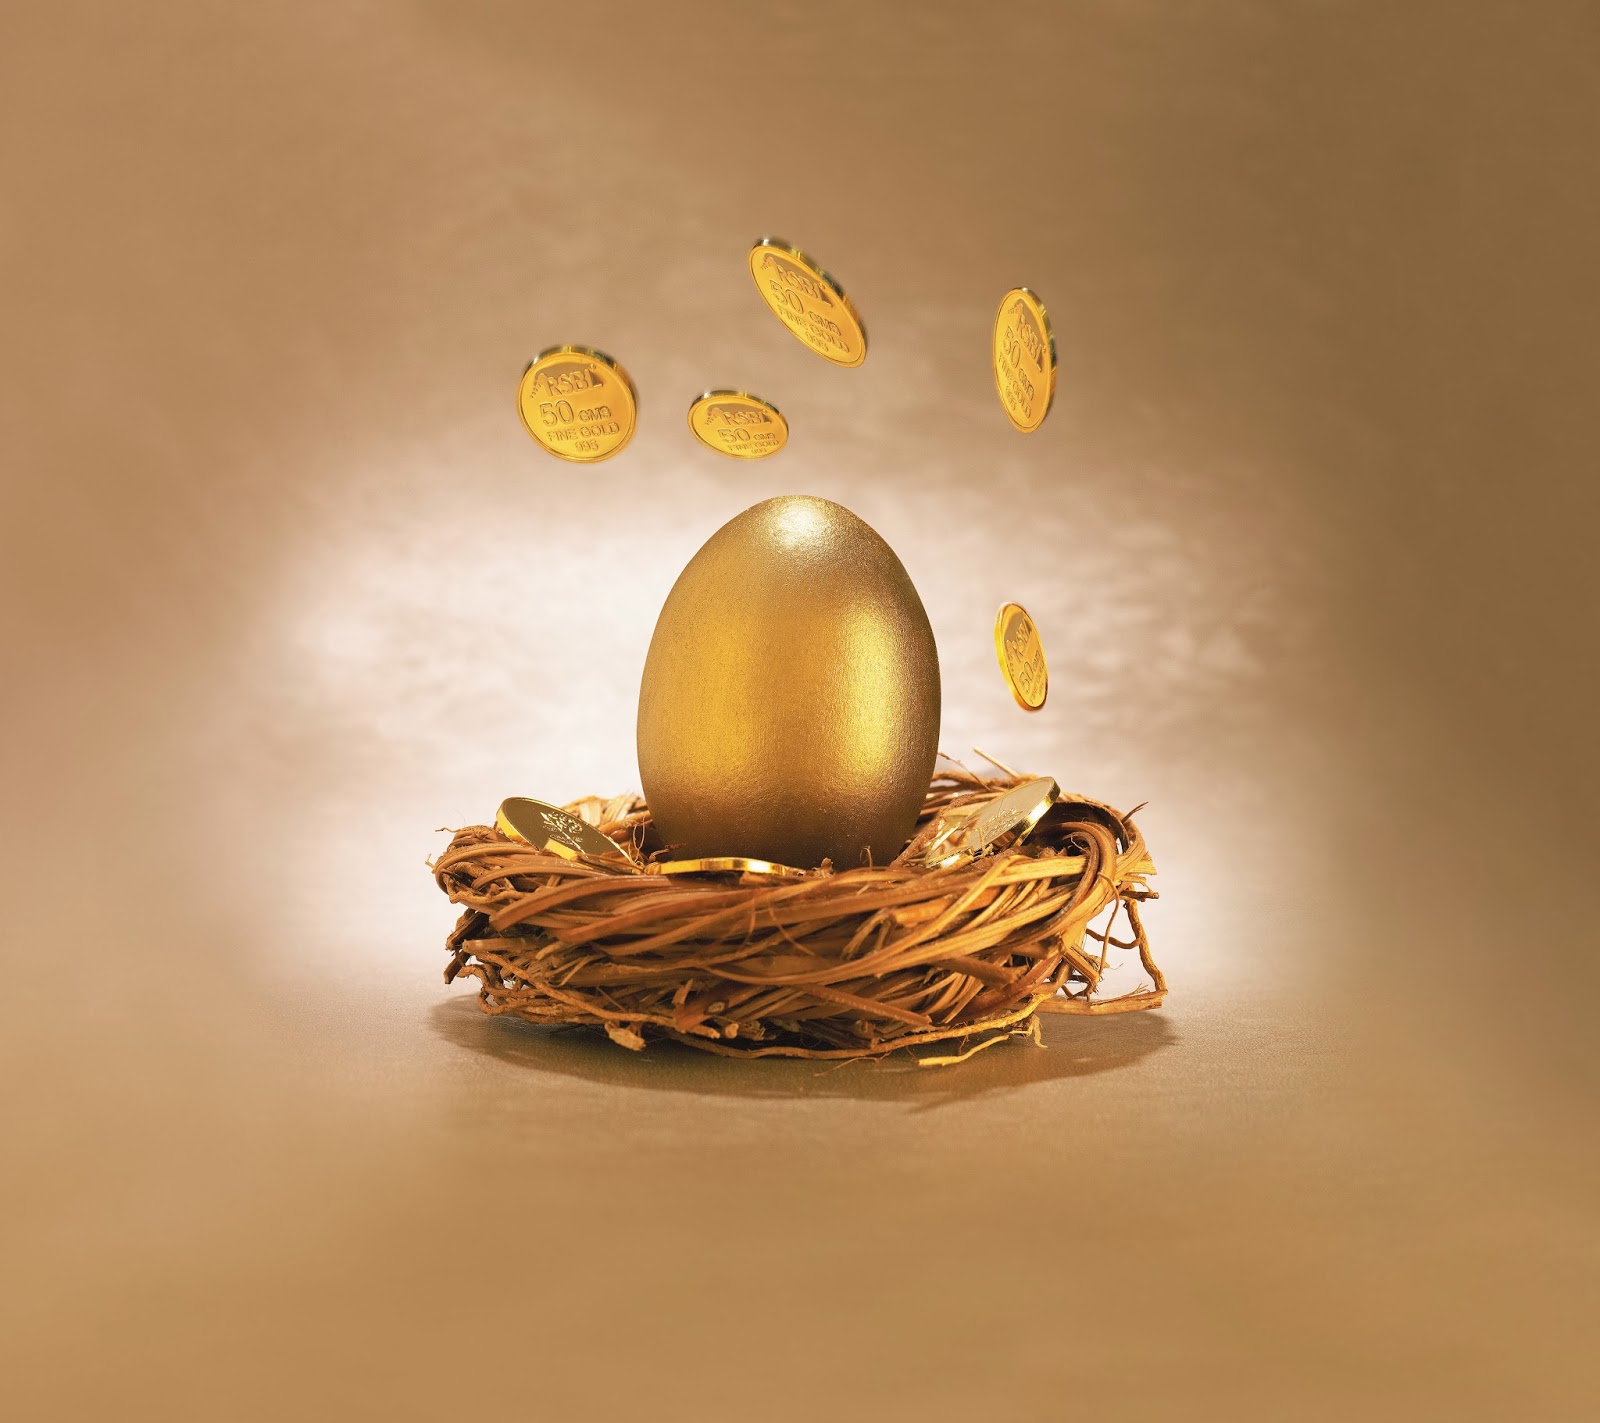 Is the golden egg about to hatch? 